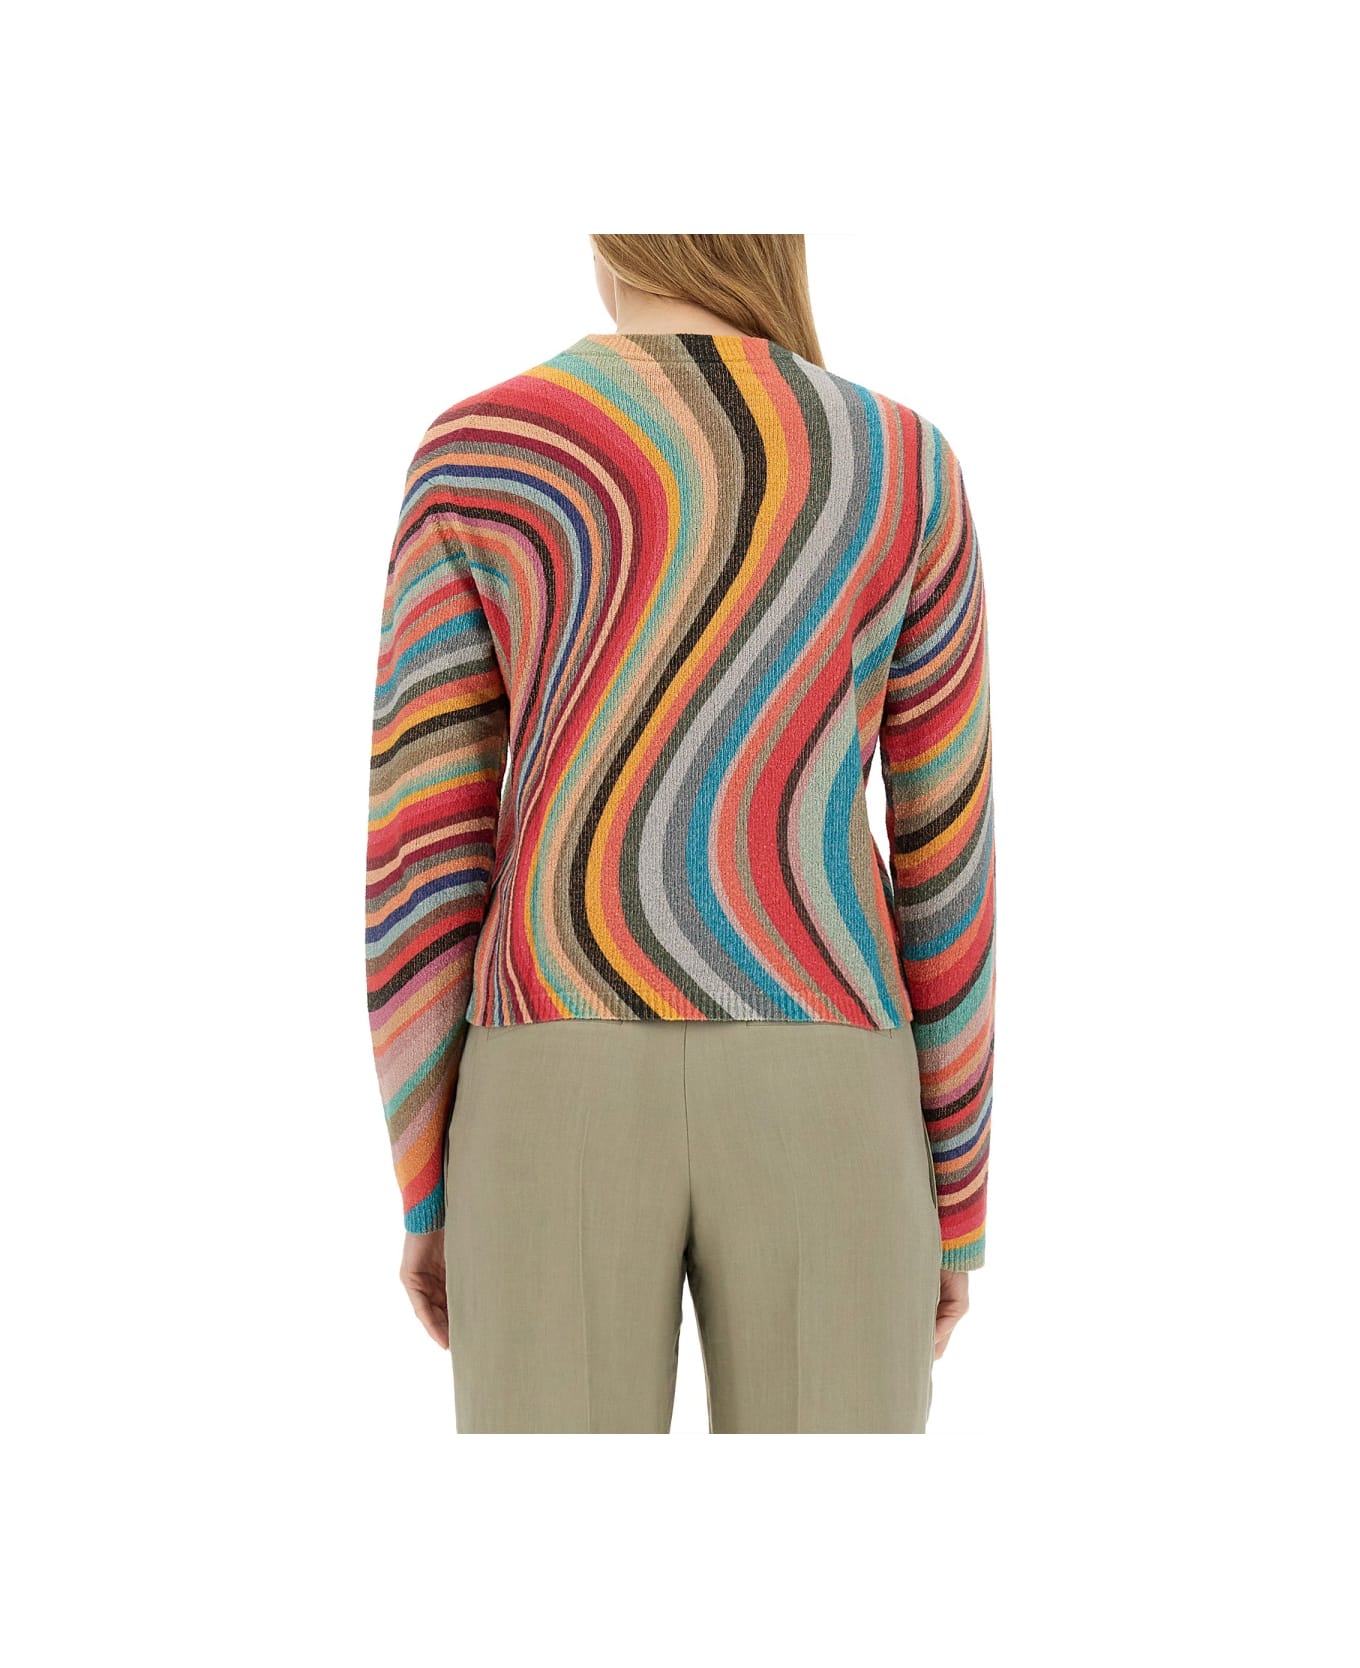 PS by Paul Smith "swirl" Shirt - MULTICOLOUR